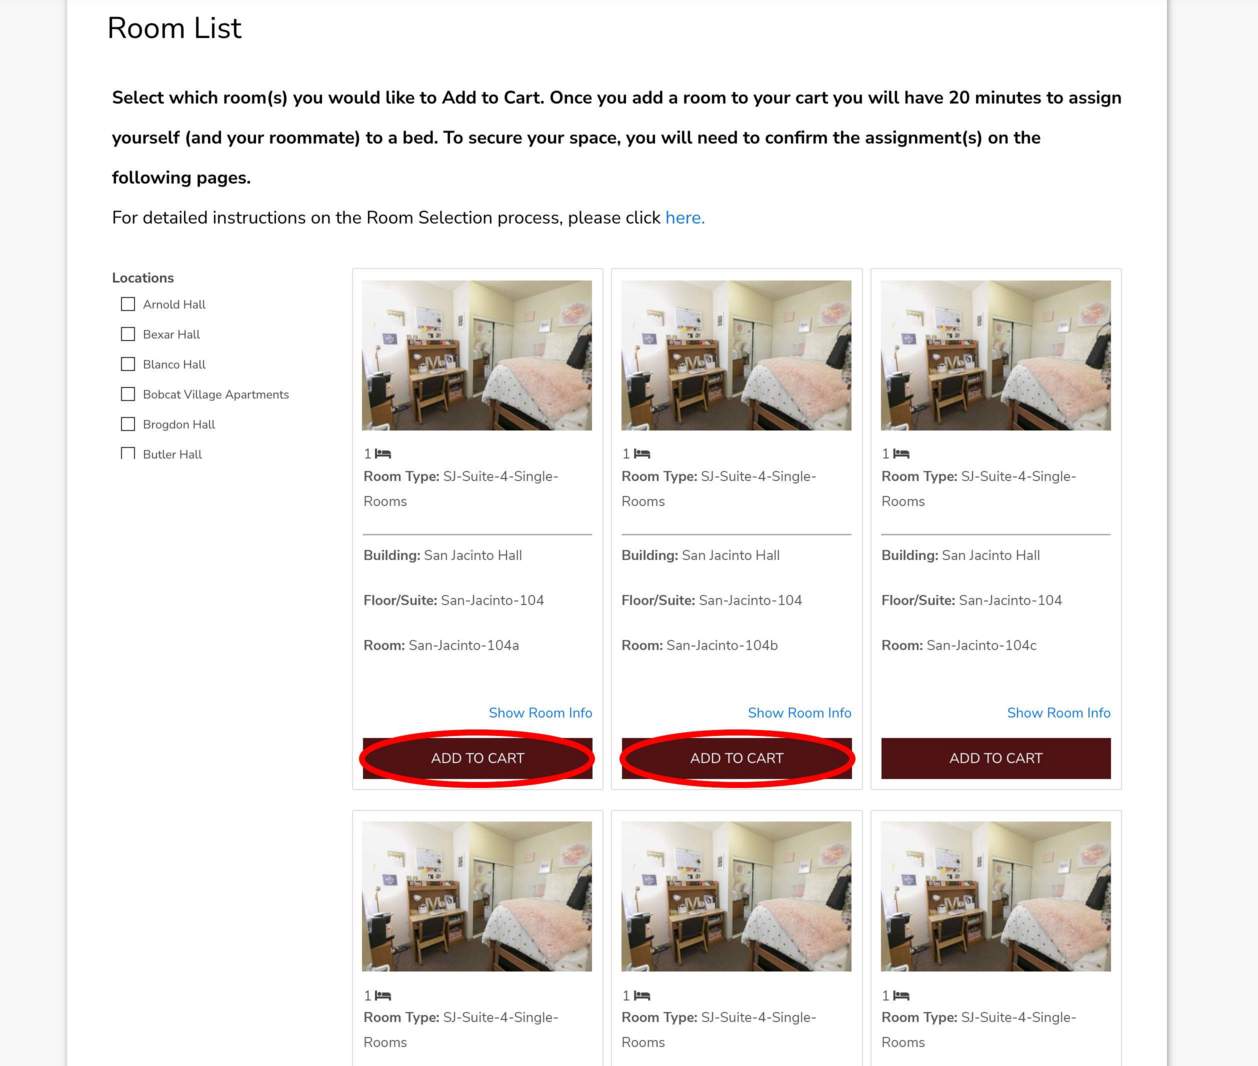 Screenshot of Room List page in the Housing Portal.